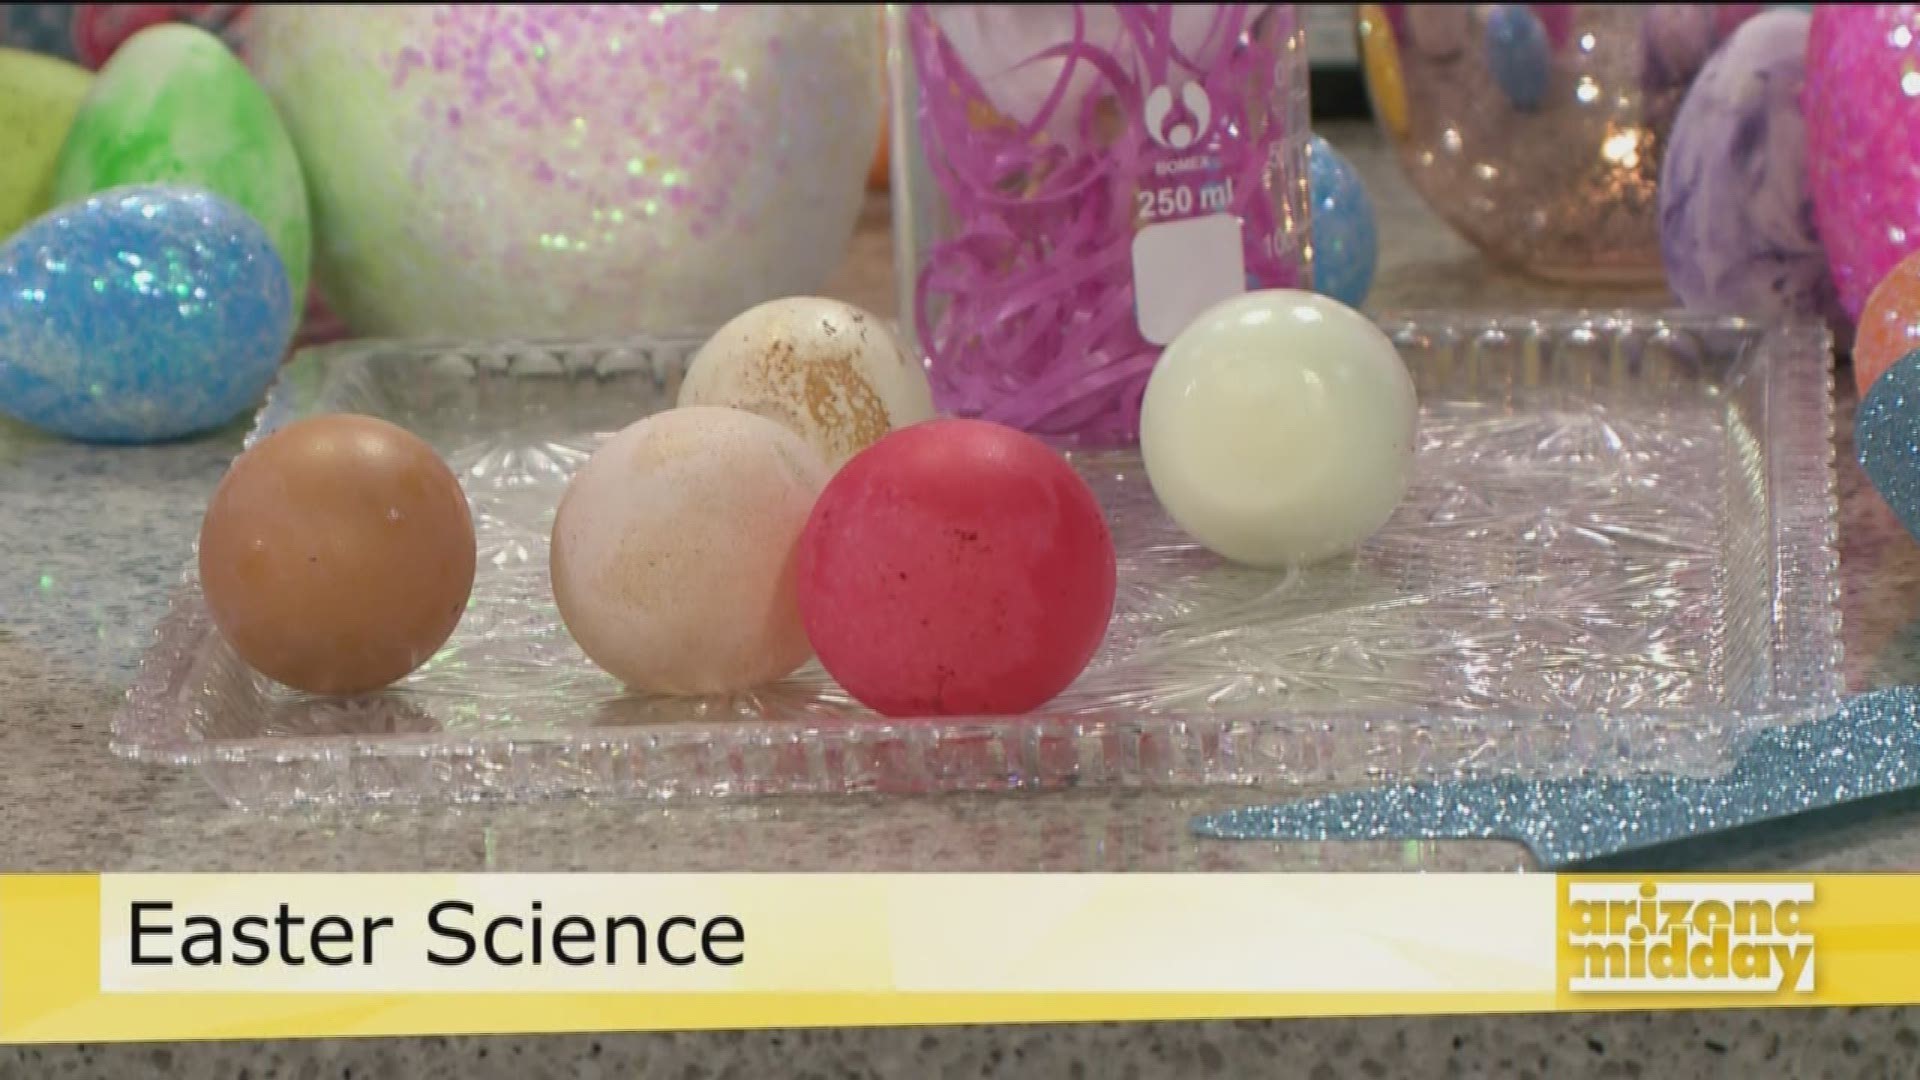 The Scientific Mom Amy Oyler is showing us some fun experiments for some post-Easter fun